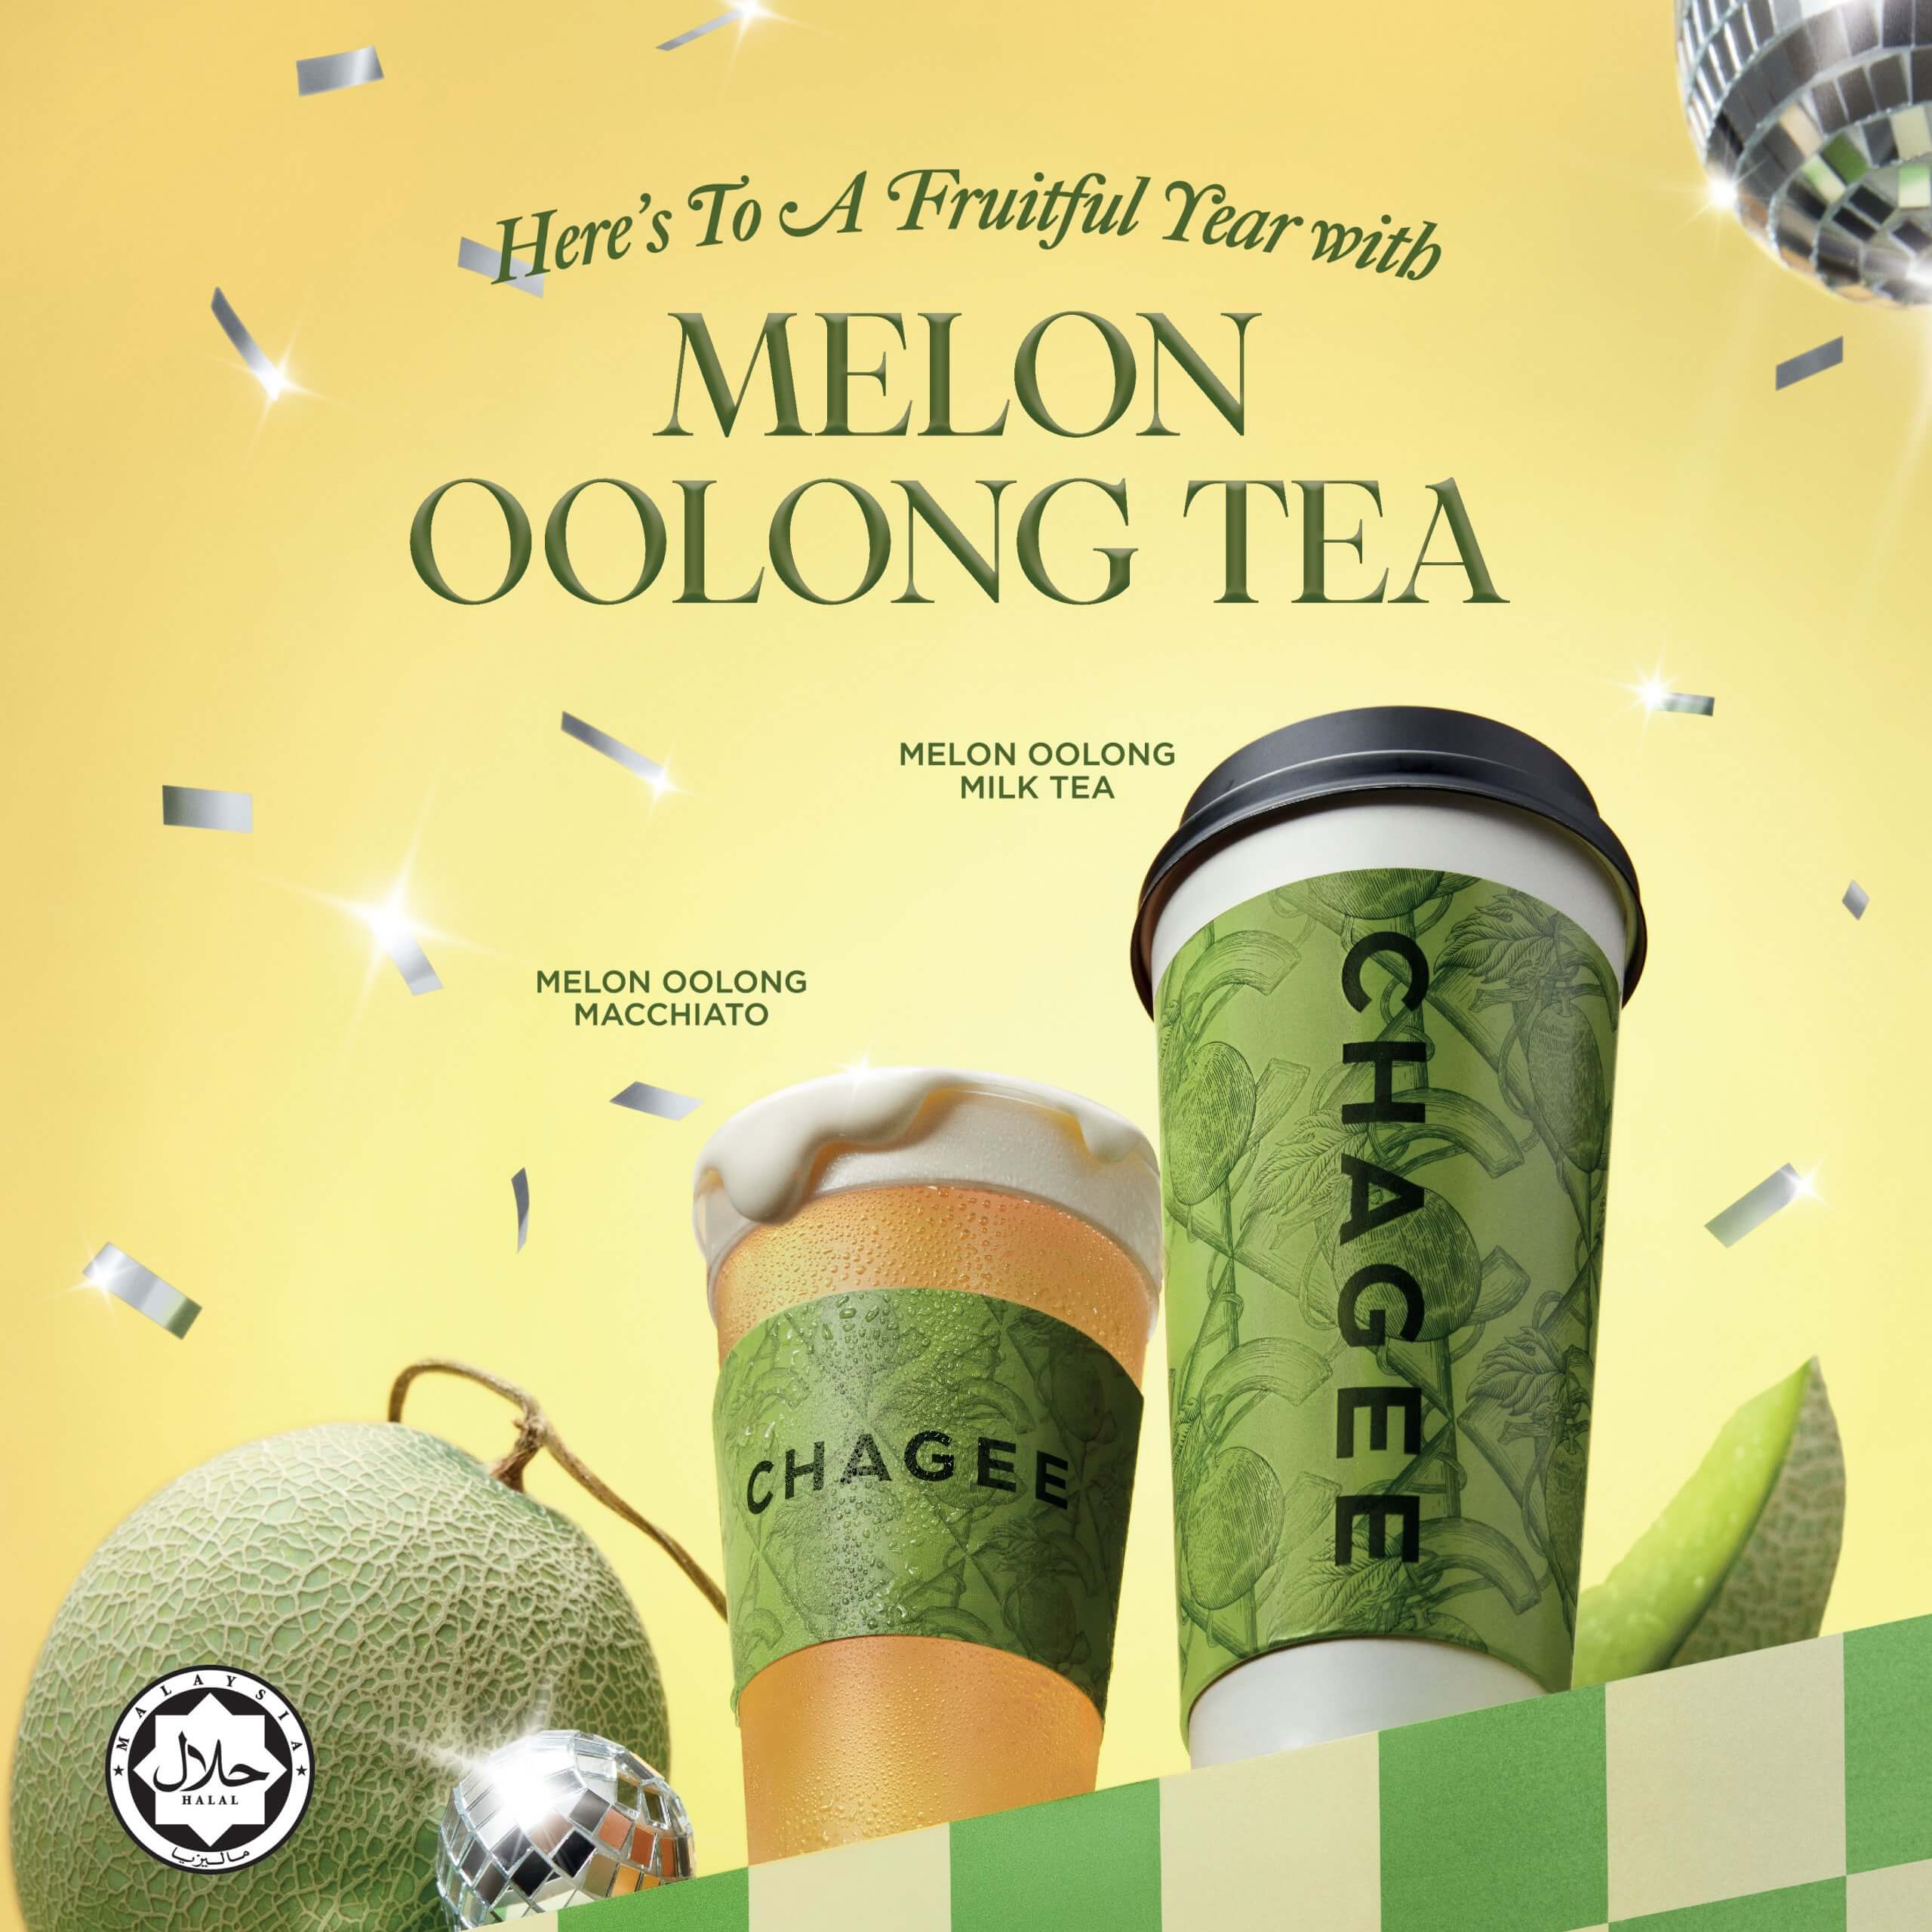 Here’s to a Fruitful Year with the Melon Oolong Series!